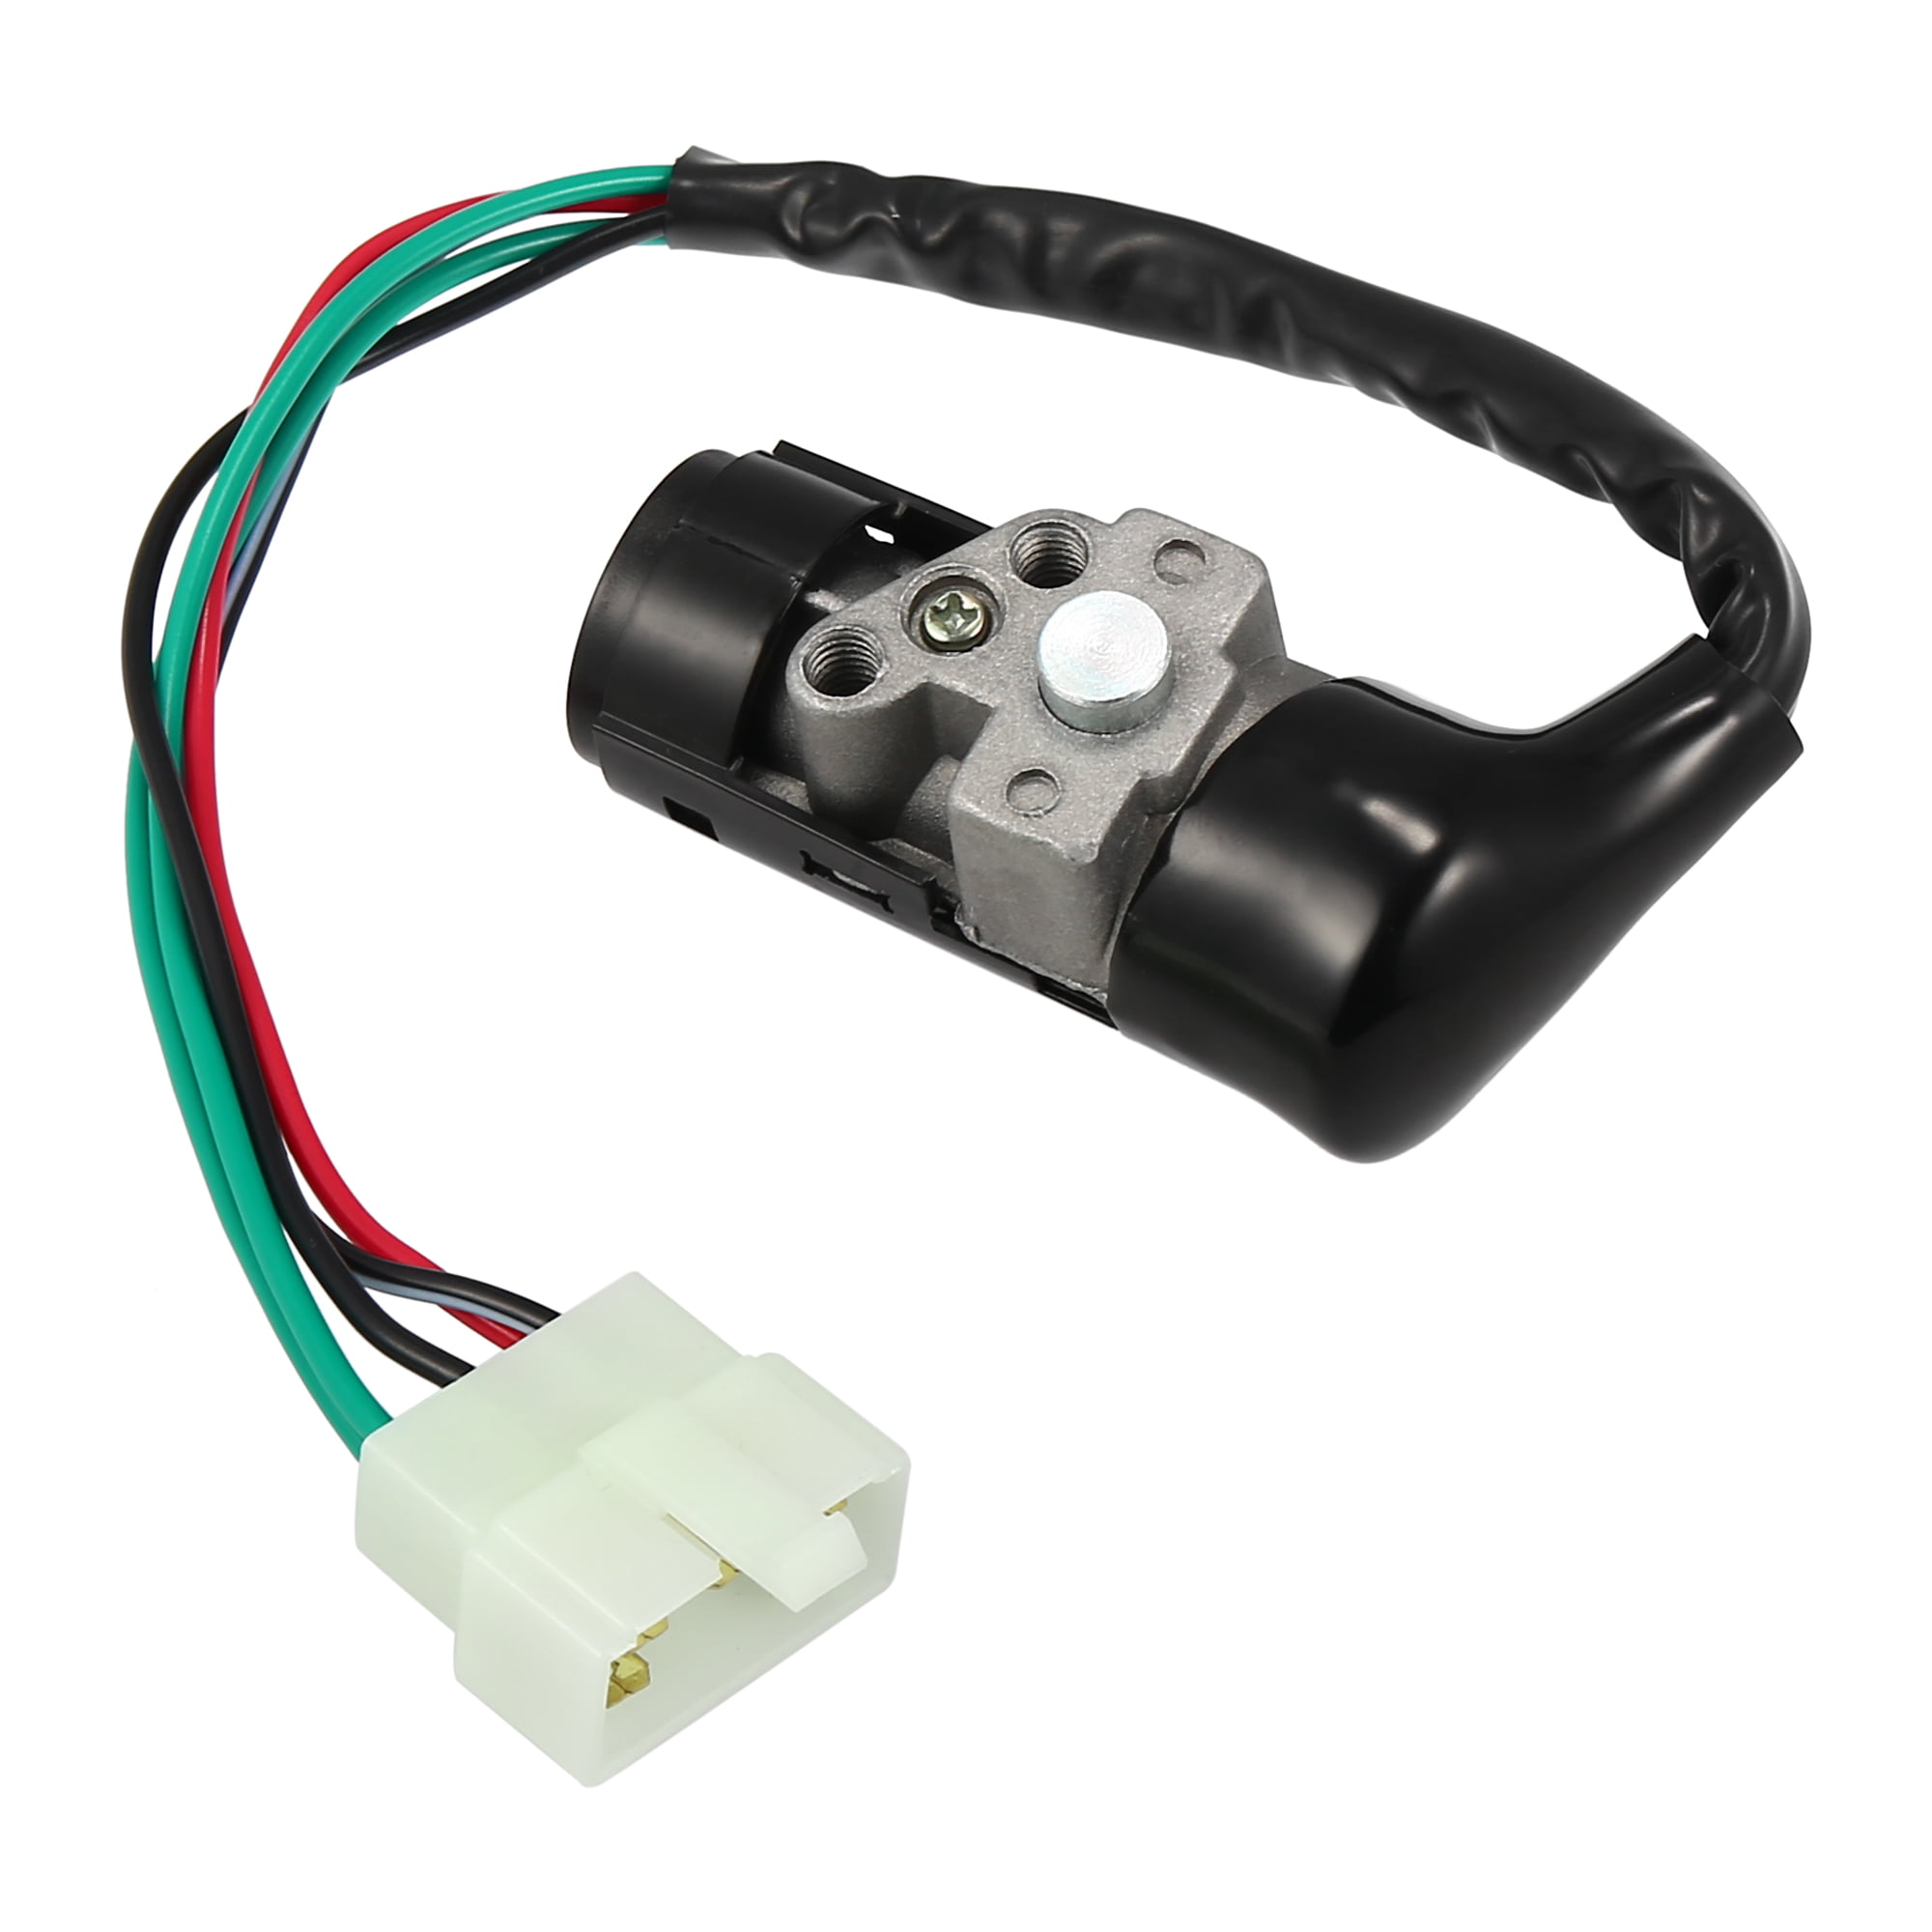 6 Wire Ignition Switch for 49Cc 50Cc 150Cc 250Cc Moped Scooter Sunny Roketa ATV 